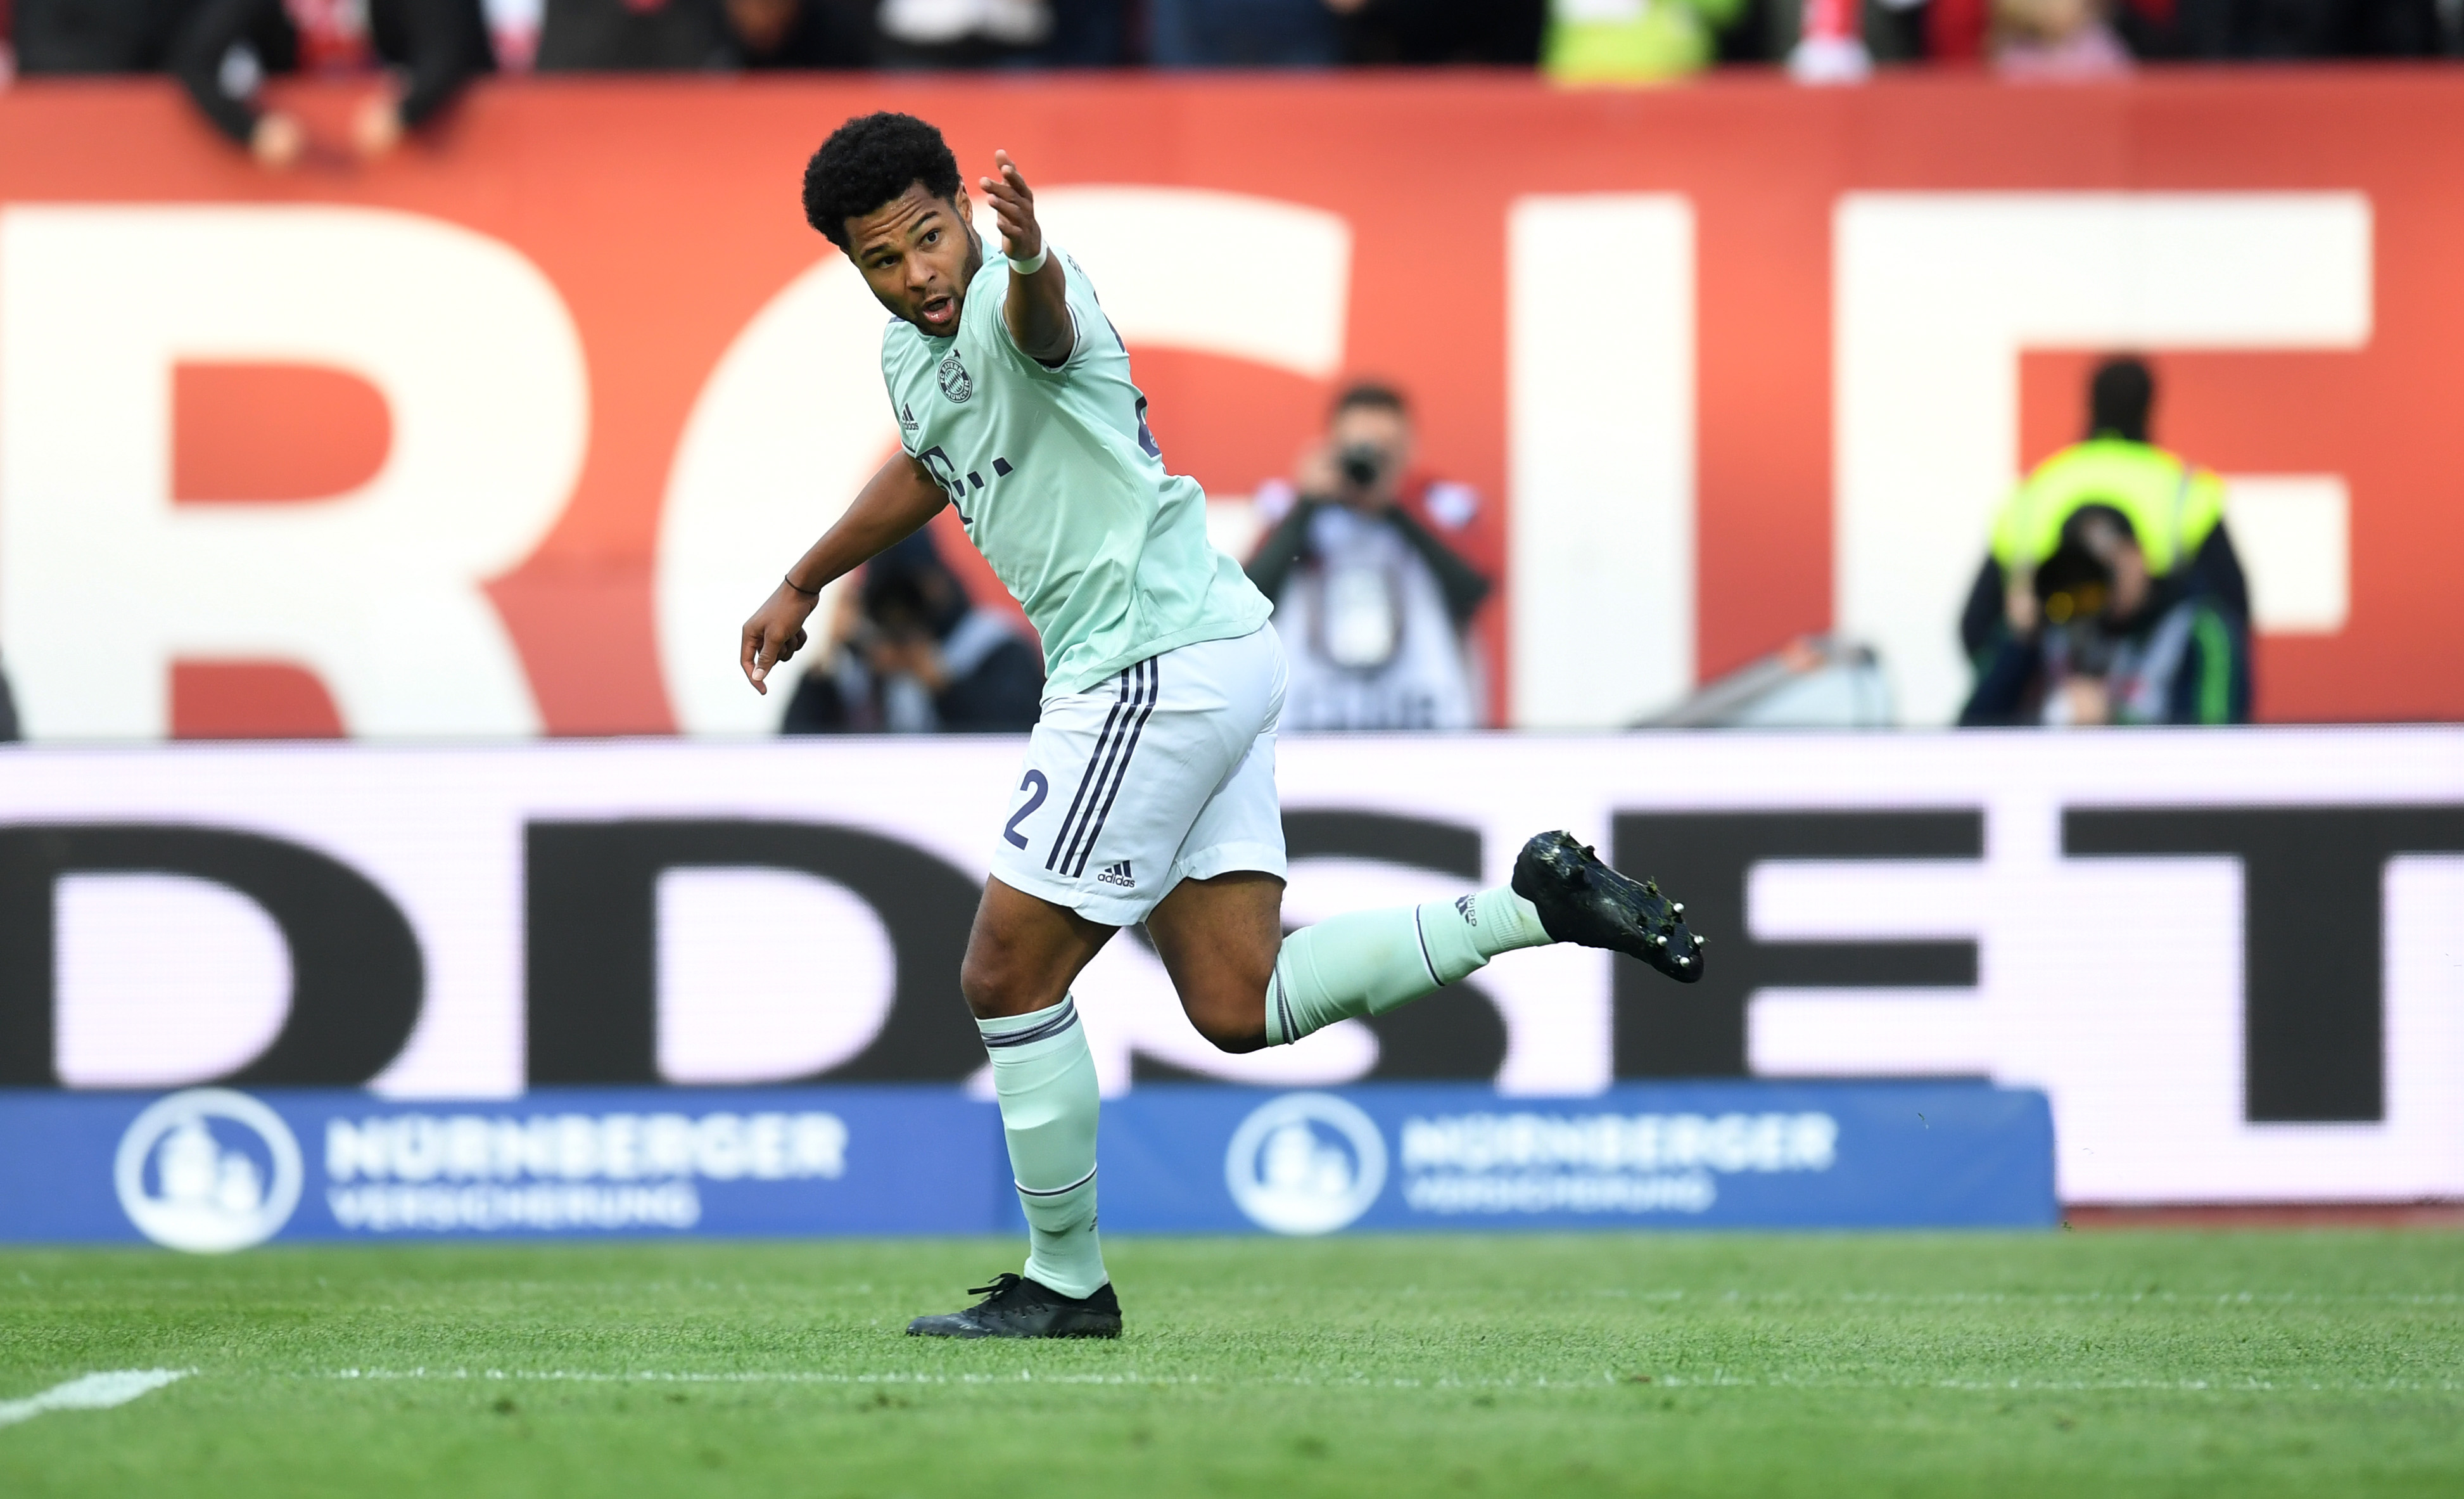 Bayern Munich's German midfielder Serge Gnabry celebrate scoring during the German first division Bundesliga football match Nuremberg v FC Bayern Munich on April 28, 2019 in Nuremberg, southern Germany. (Photo by Christof STACHE / AFP) / RESTRICTIONS: DFL REGULATIONS PROHIBIT ANY USE OF PHOTOGRAPHS AS IMAGE SEQUENCES AND/OR QUASI-VIDEO        (Photo credit should read CHRISTOF STACHE/AFP/Getty Images)